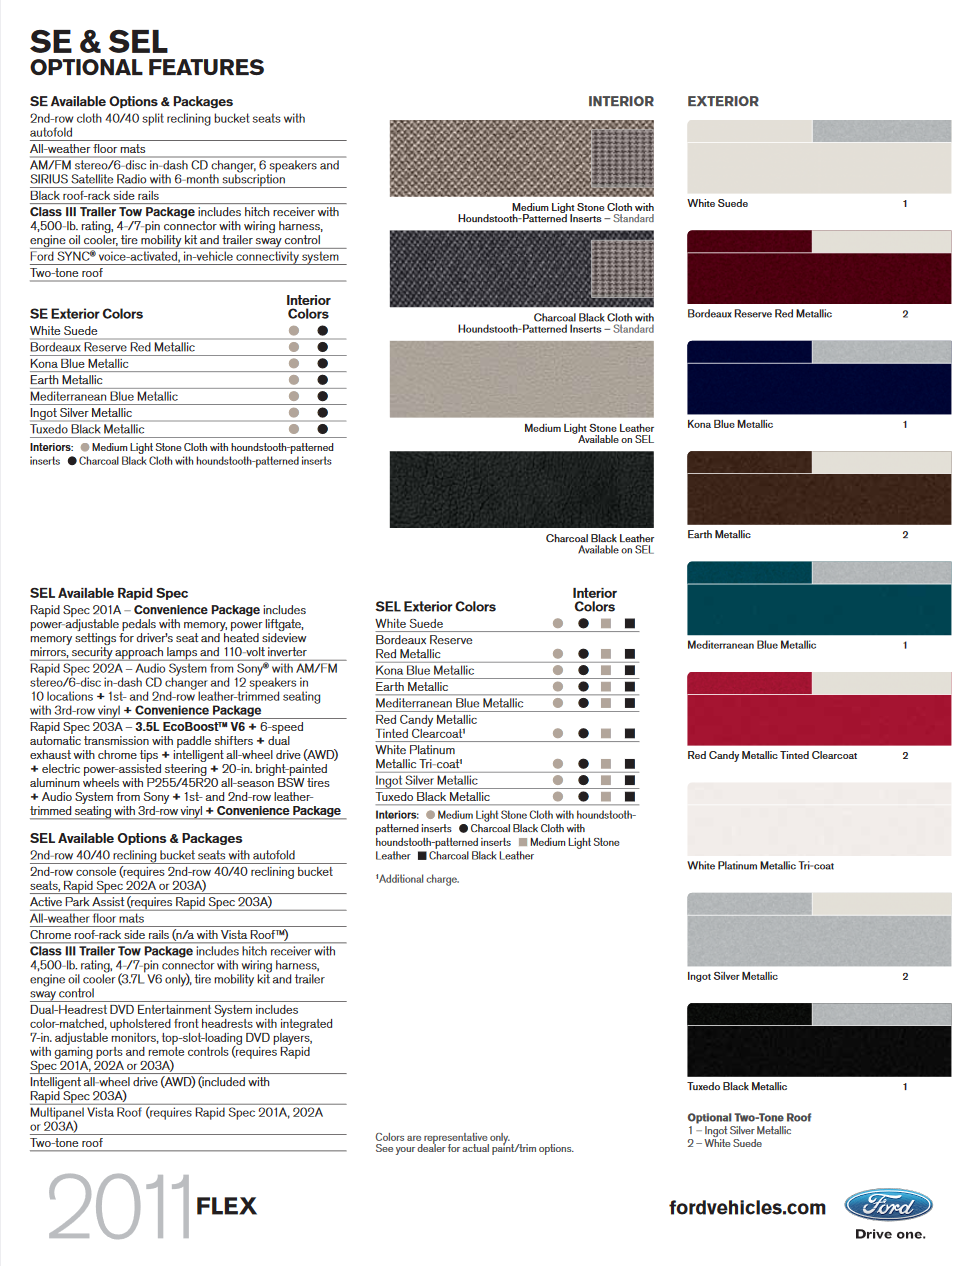 Exterior Paint Codes used on a Ford Flex